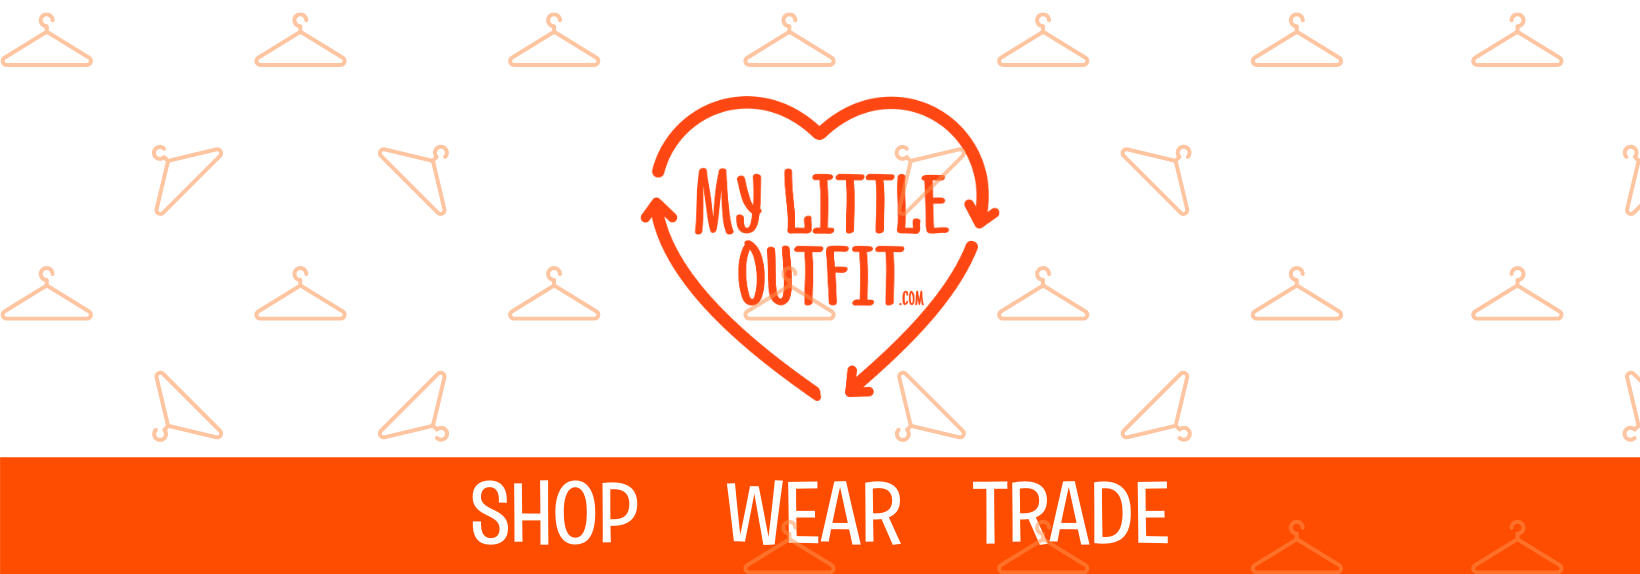 My Little Outfit Helping Keep Your Child’s Closet Clutter-Free